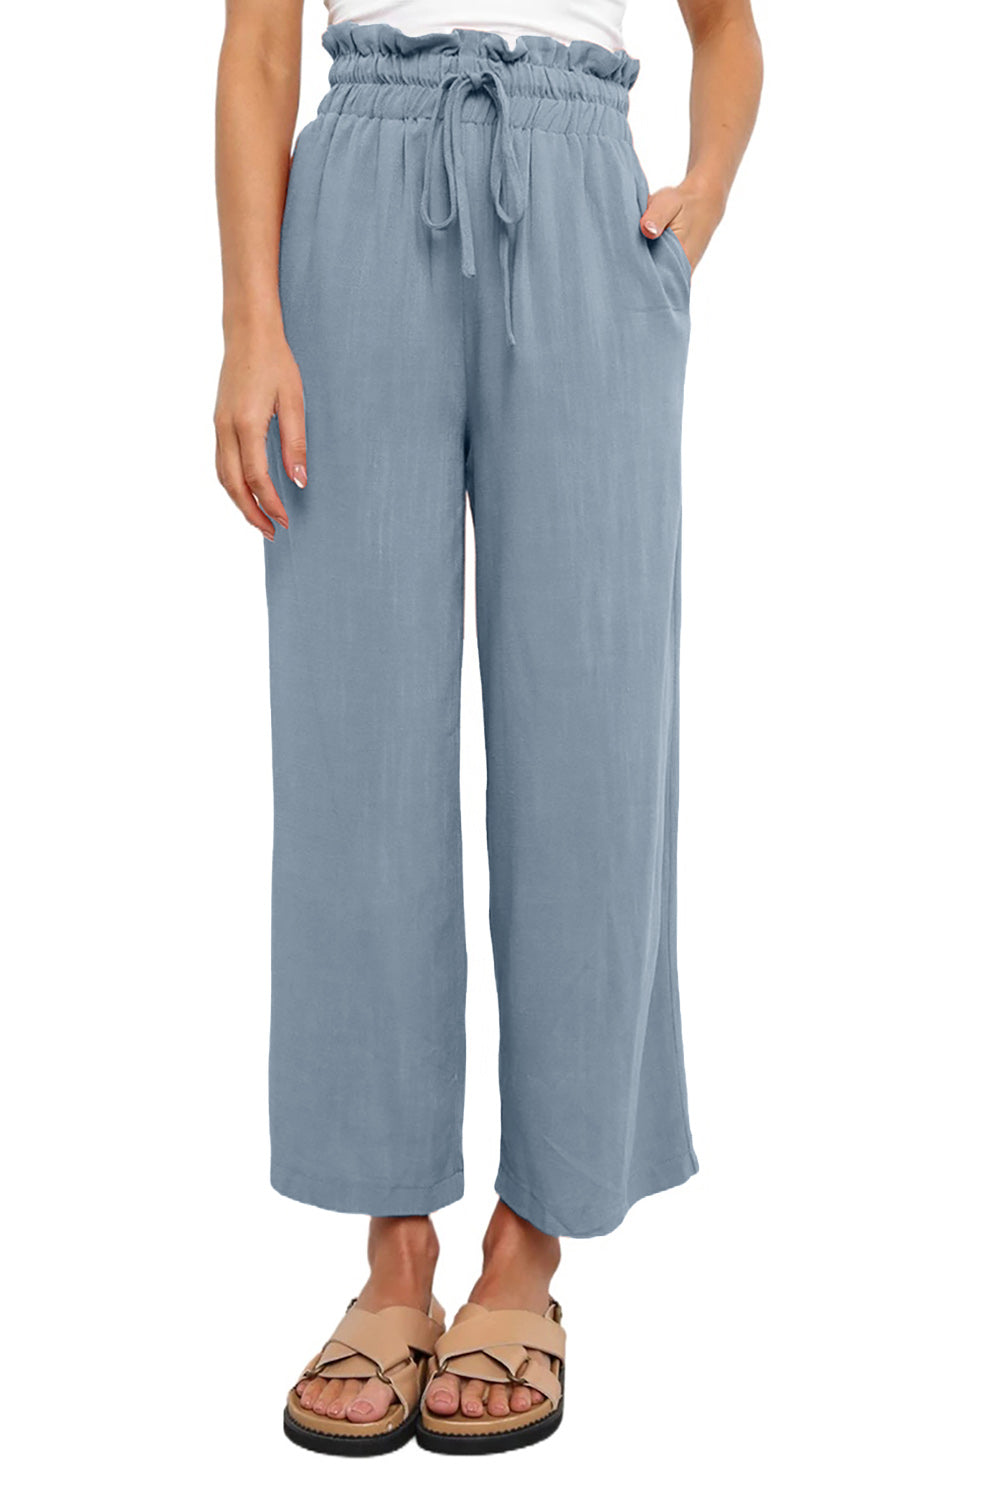 LC771296-4-S, LC771296-4-M, LC771296-4-L, LC771296-4-XL, Sky Blue Women's High Waist Paper Bag Straight Leg Cropped Long Pants with Pocket